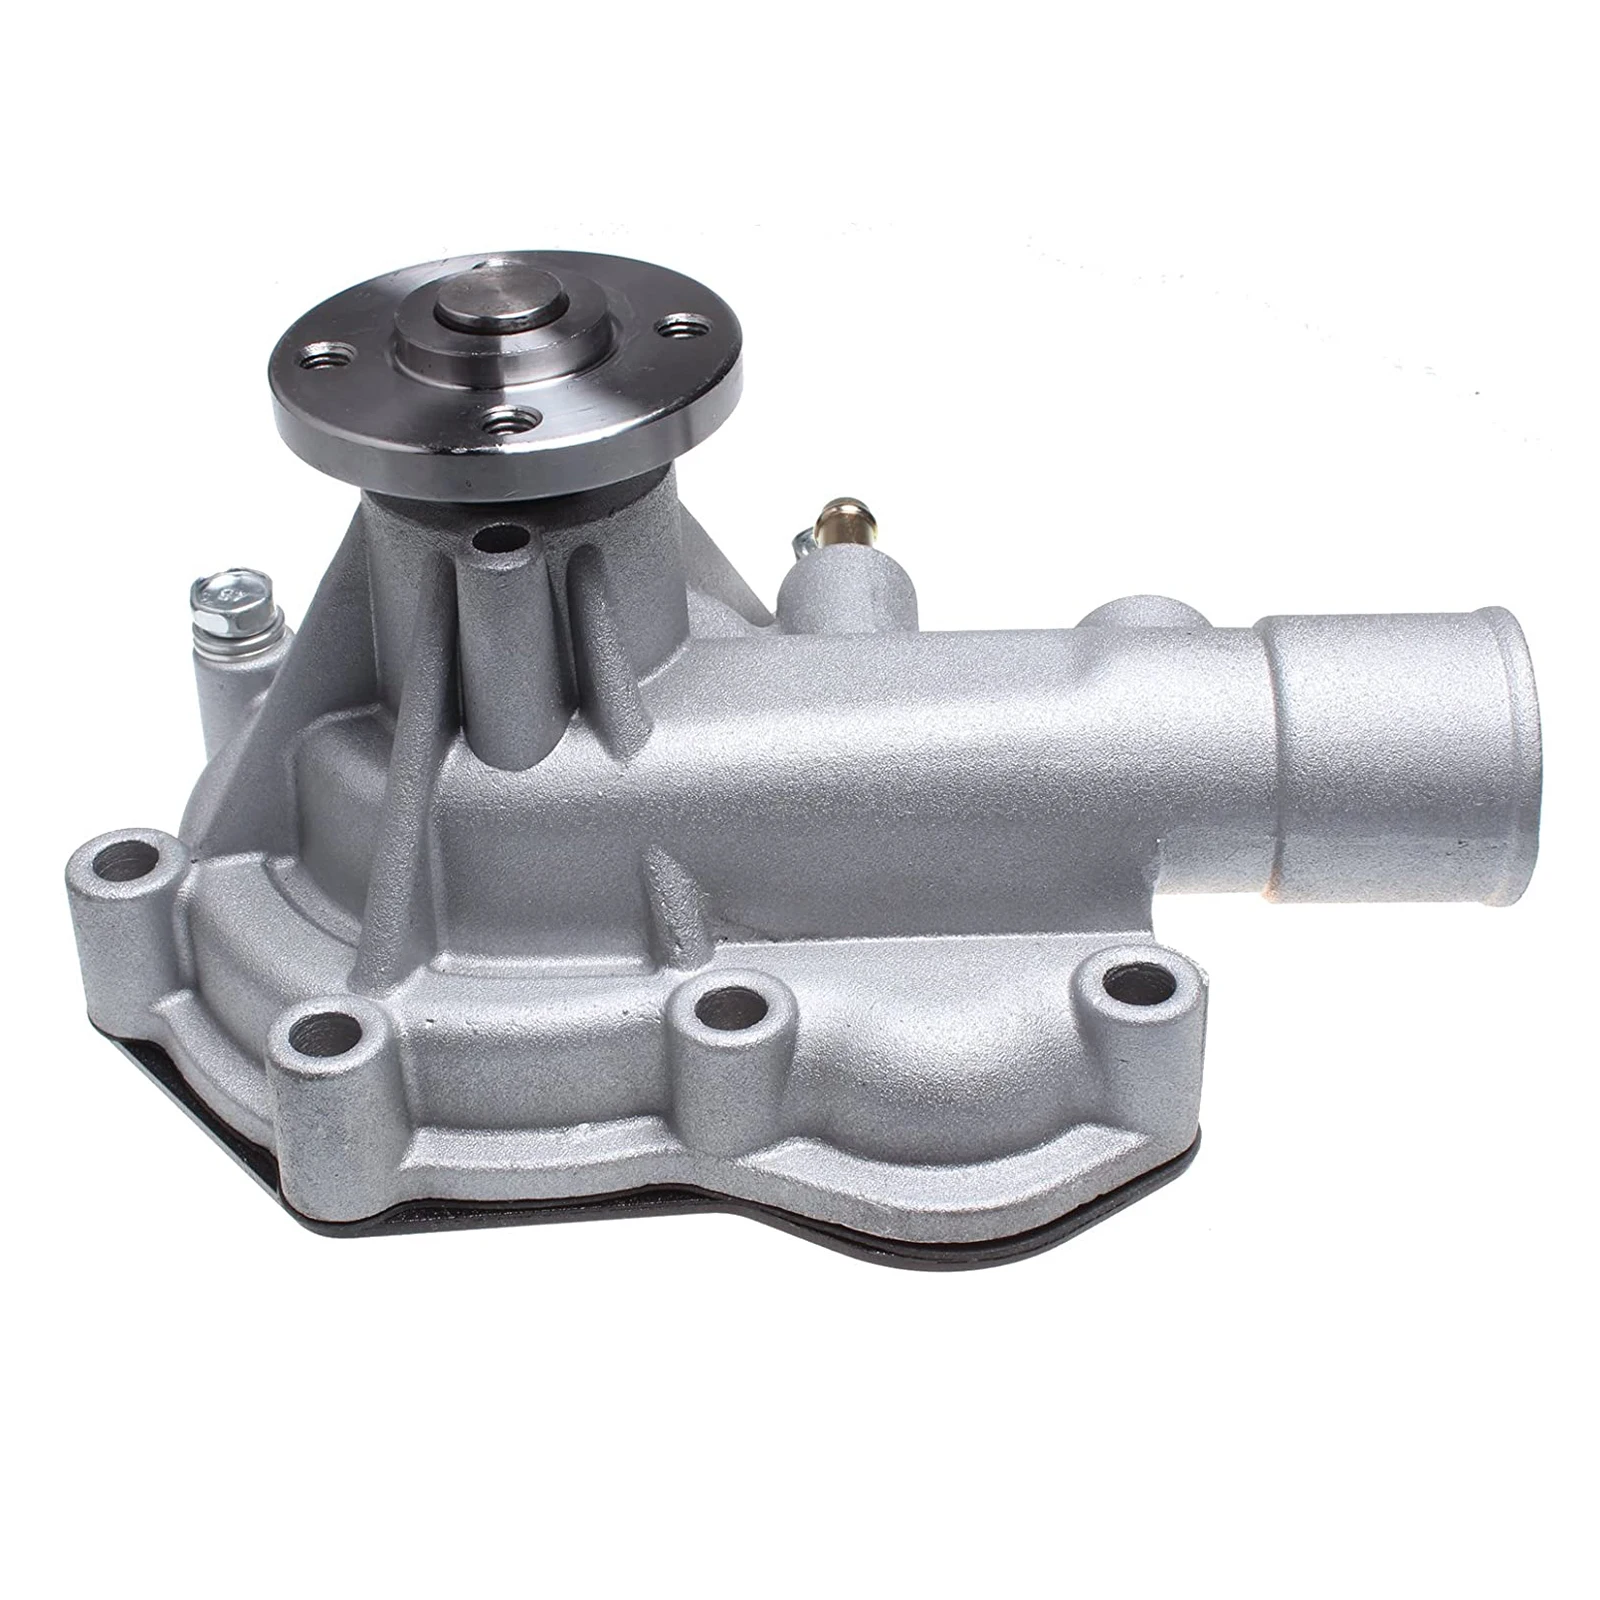 Details about   Water Pump Suitable For Mitsubishi FD30 FD28 FD25 